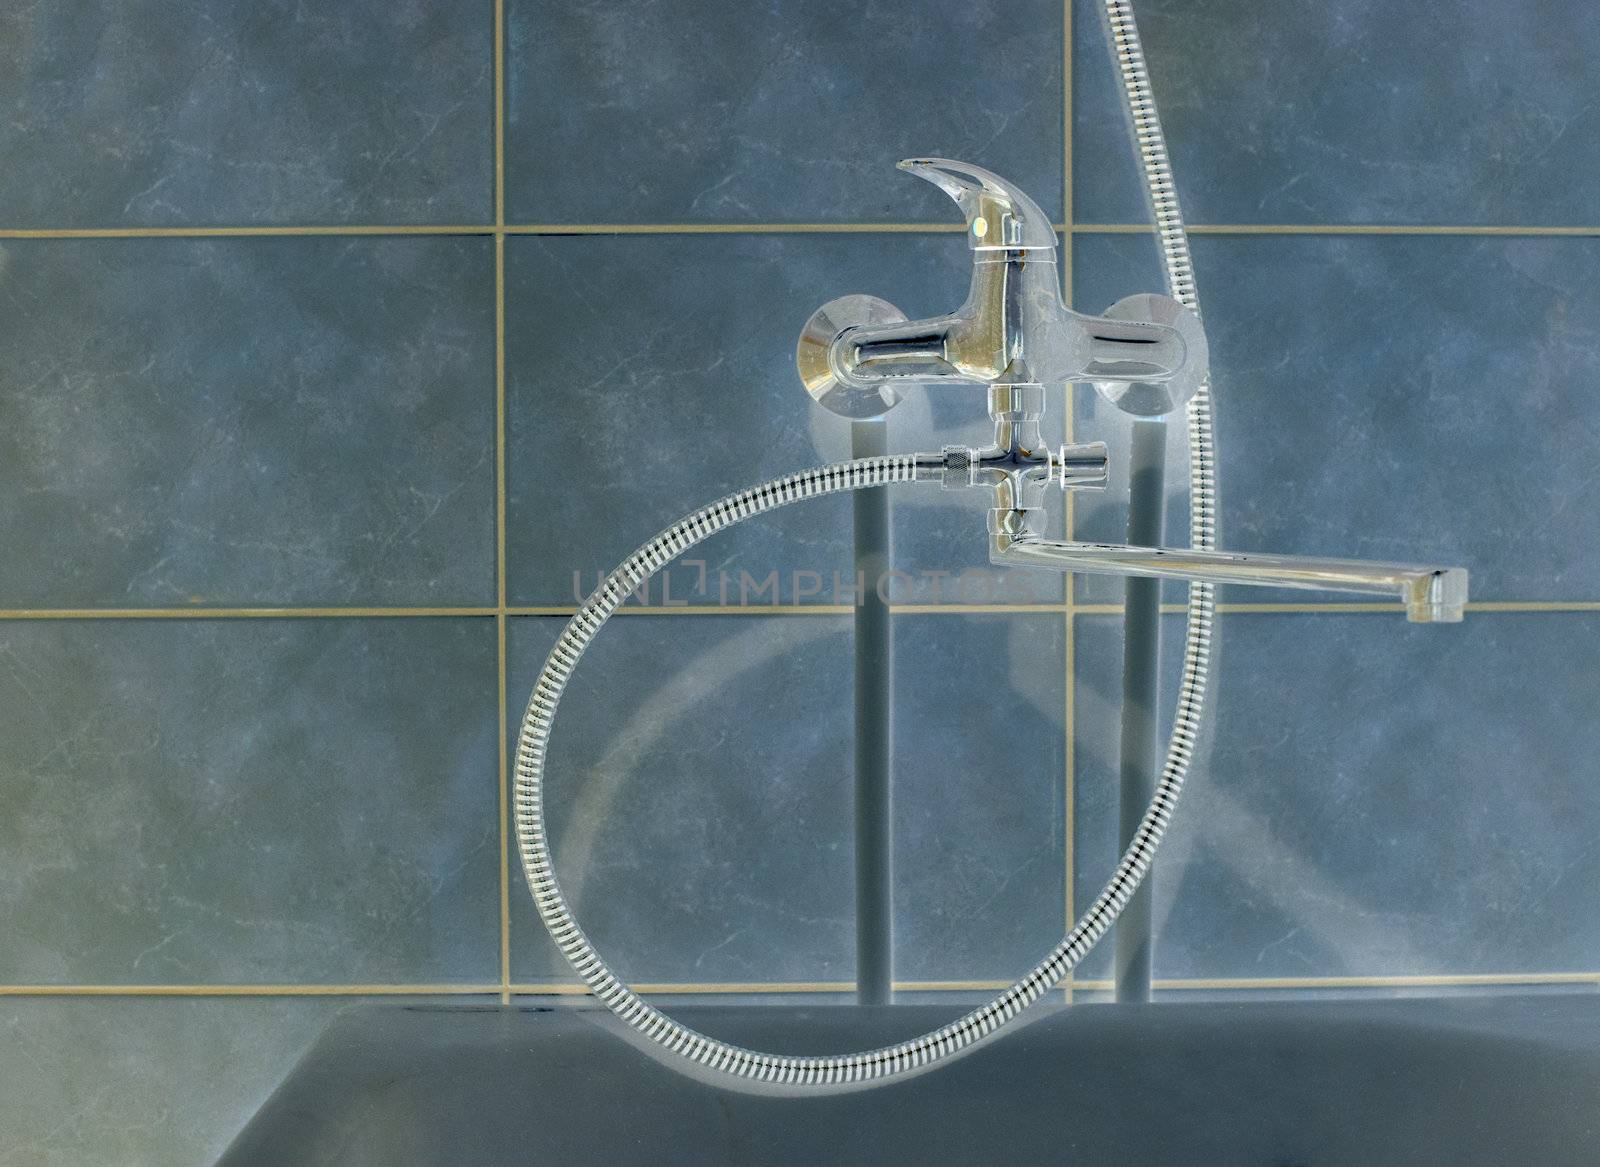 Shaded crome shower faucet turned to the right